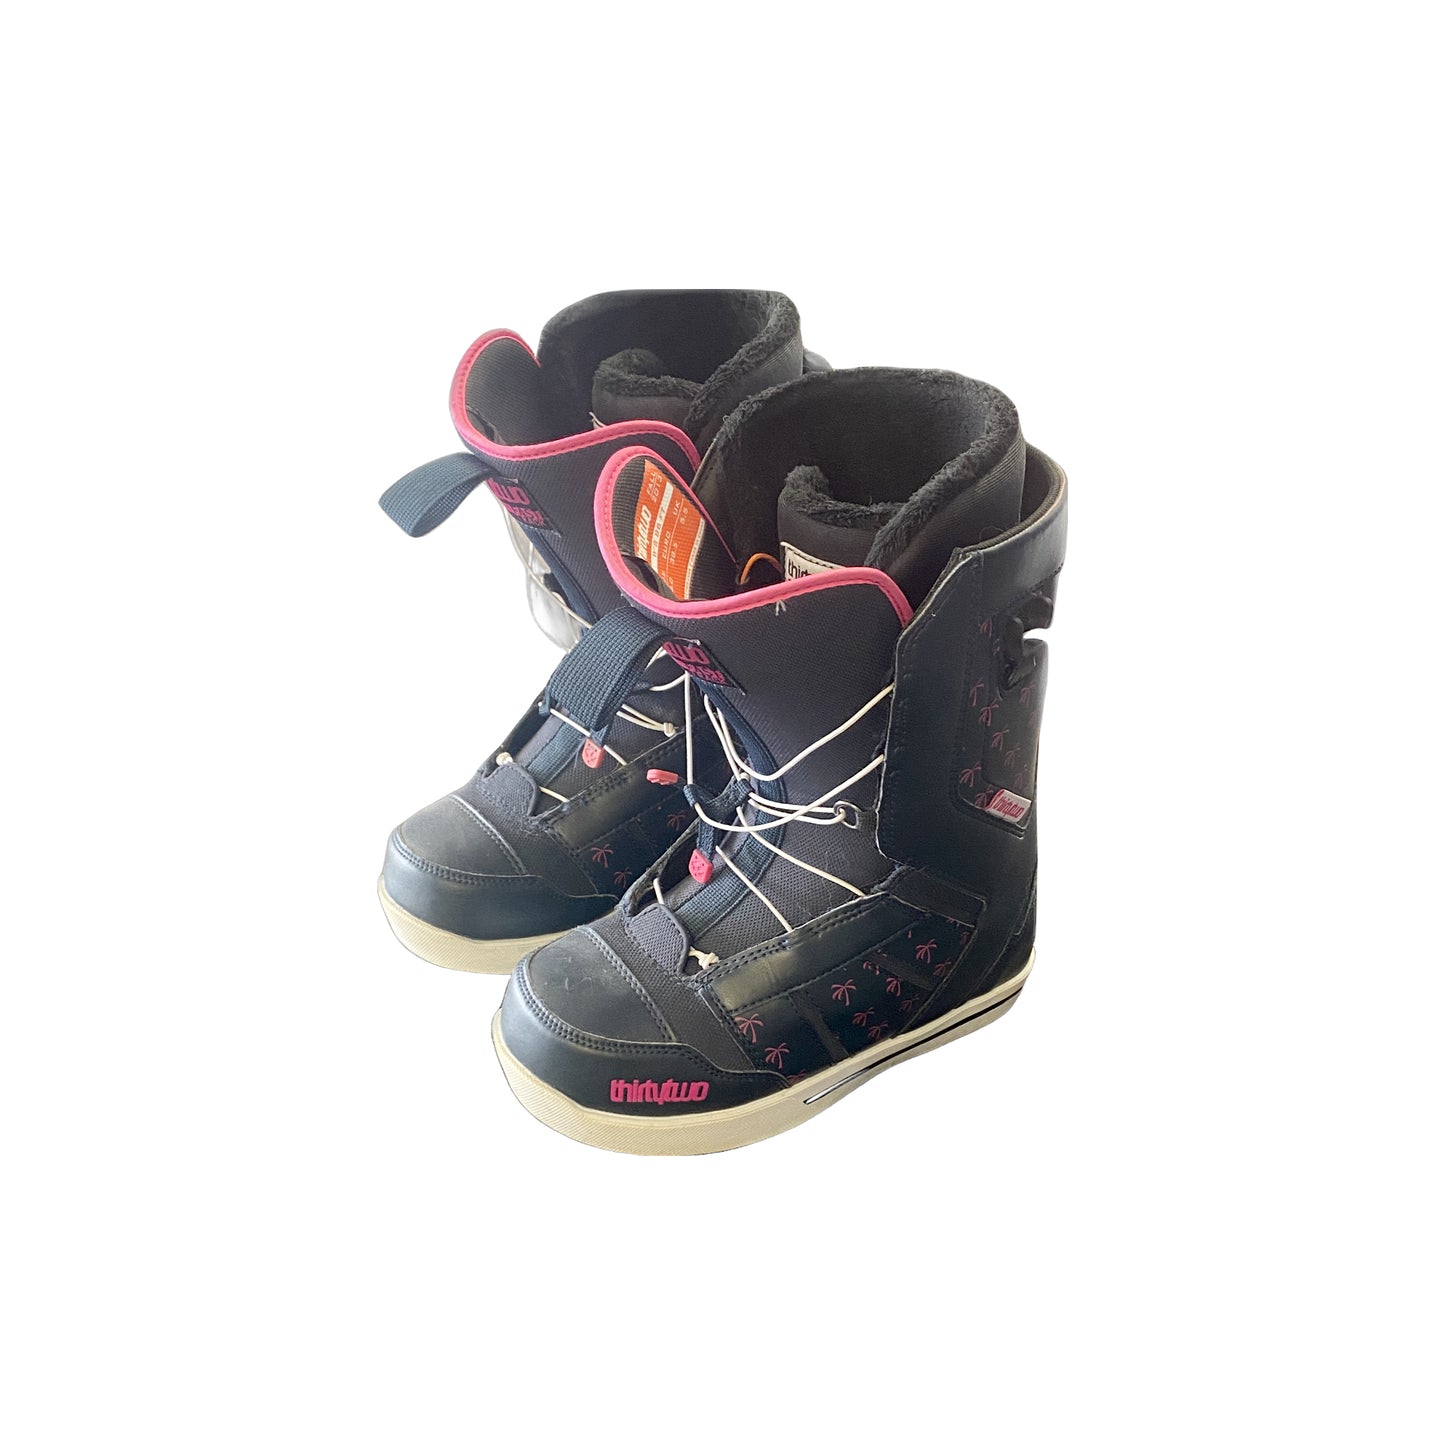 ThirtyTwo Women’s Snowboard Boots - Size 8